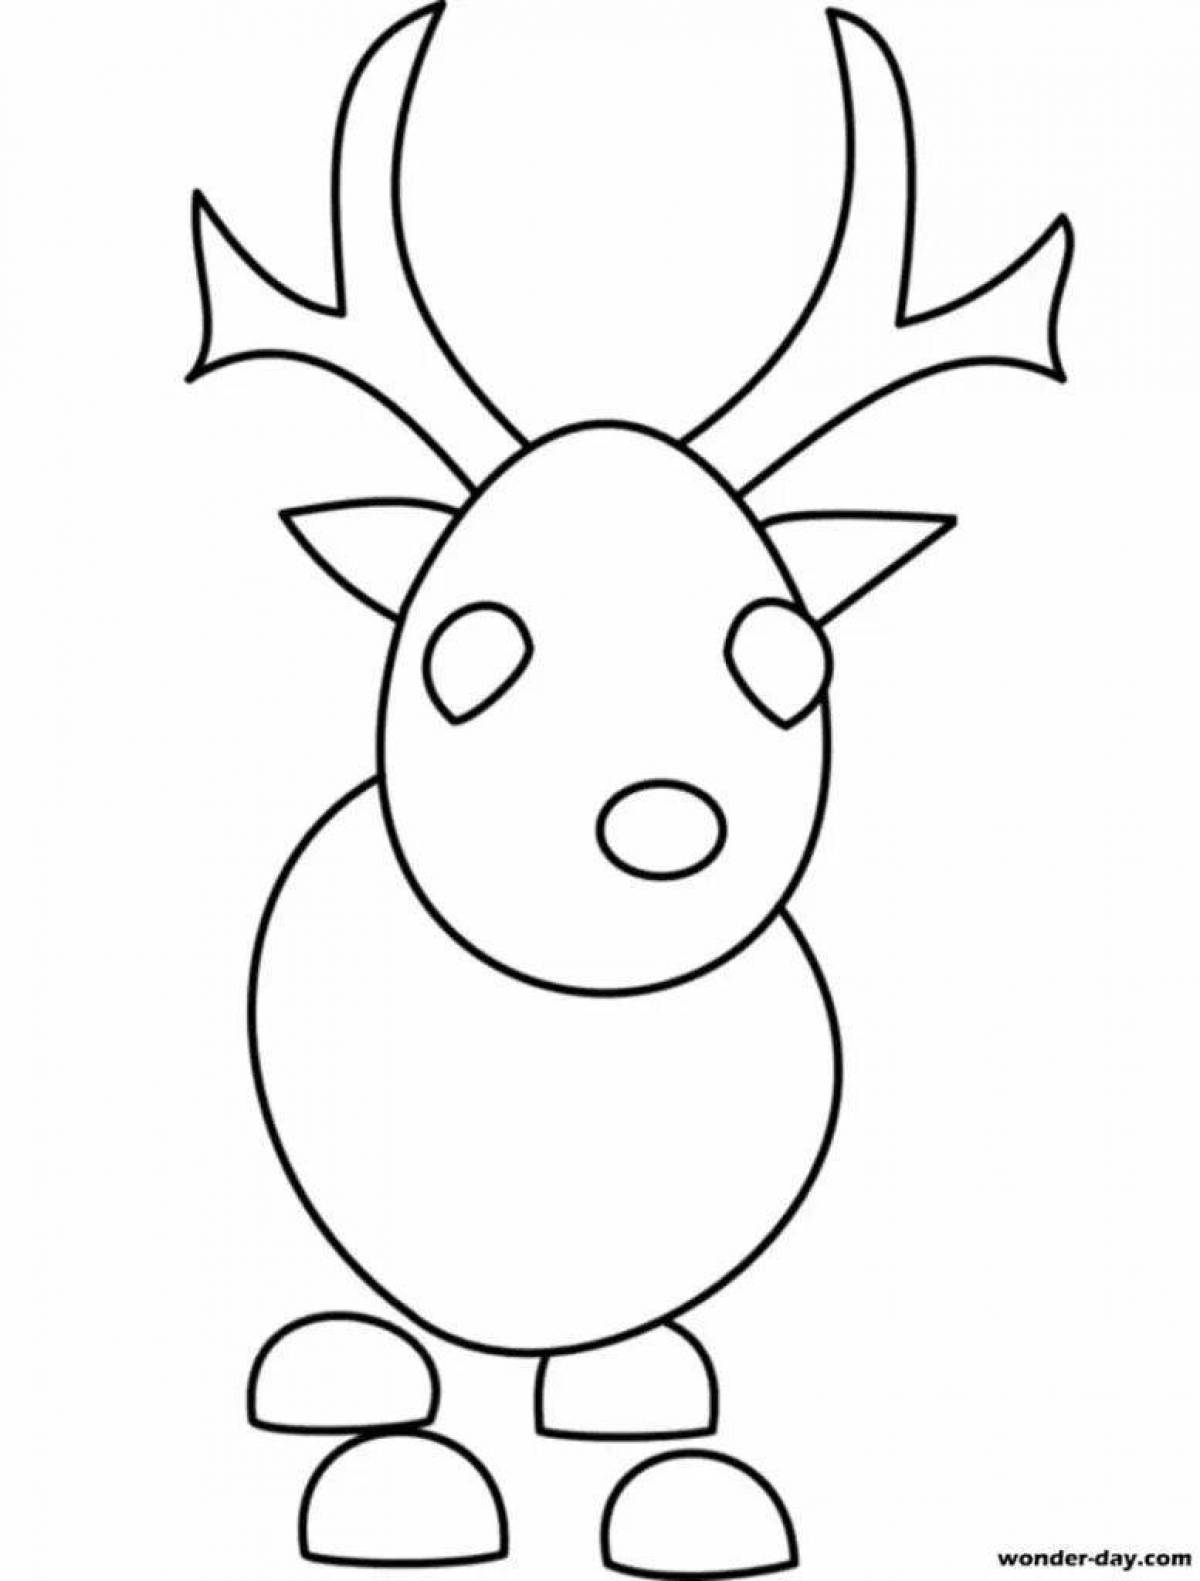 Adopt me pets playful coloring page